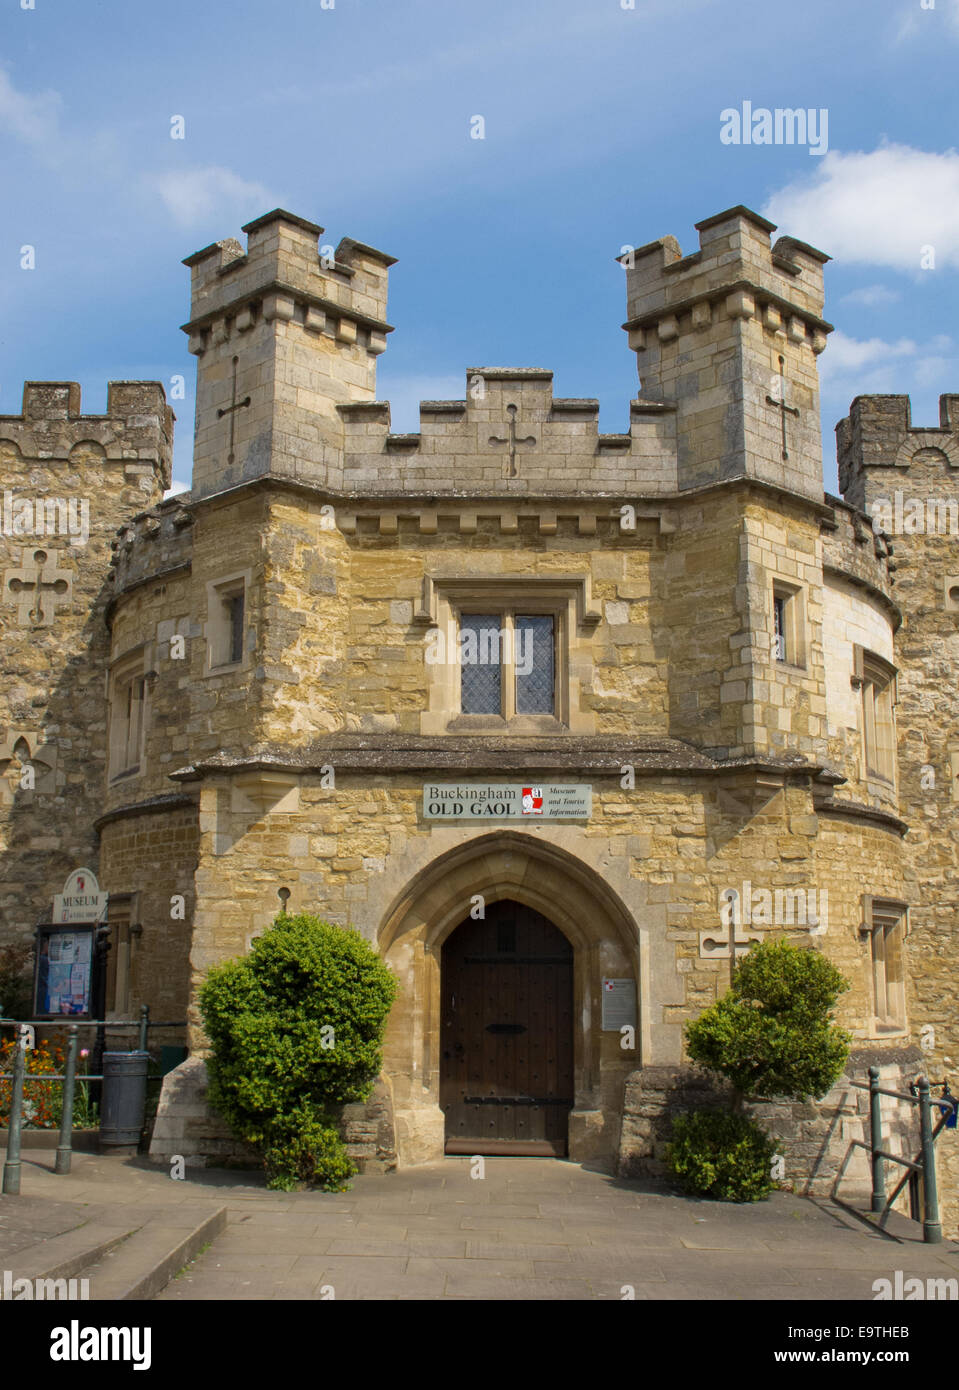 The Old Gaol, Market Hill, Buckingham, England. At the heart of the historic market town of Buckingham. The Old Gaol was built in 1748 in the style of a castle, with later additions in 1839 by local architect George Gilbert Scott. The prison is now a museum. Stock Photo